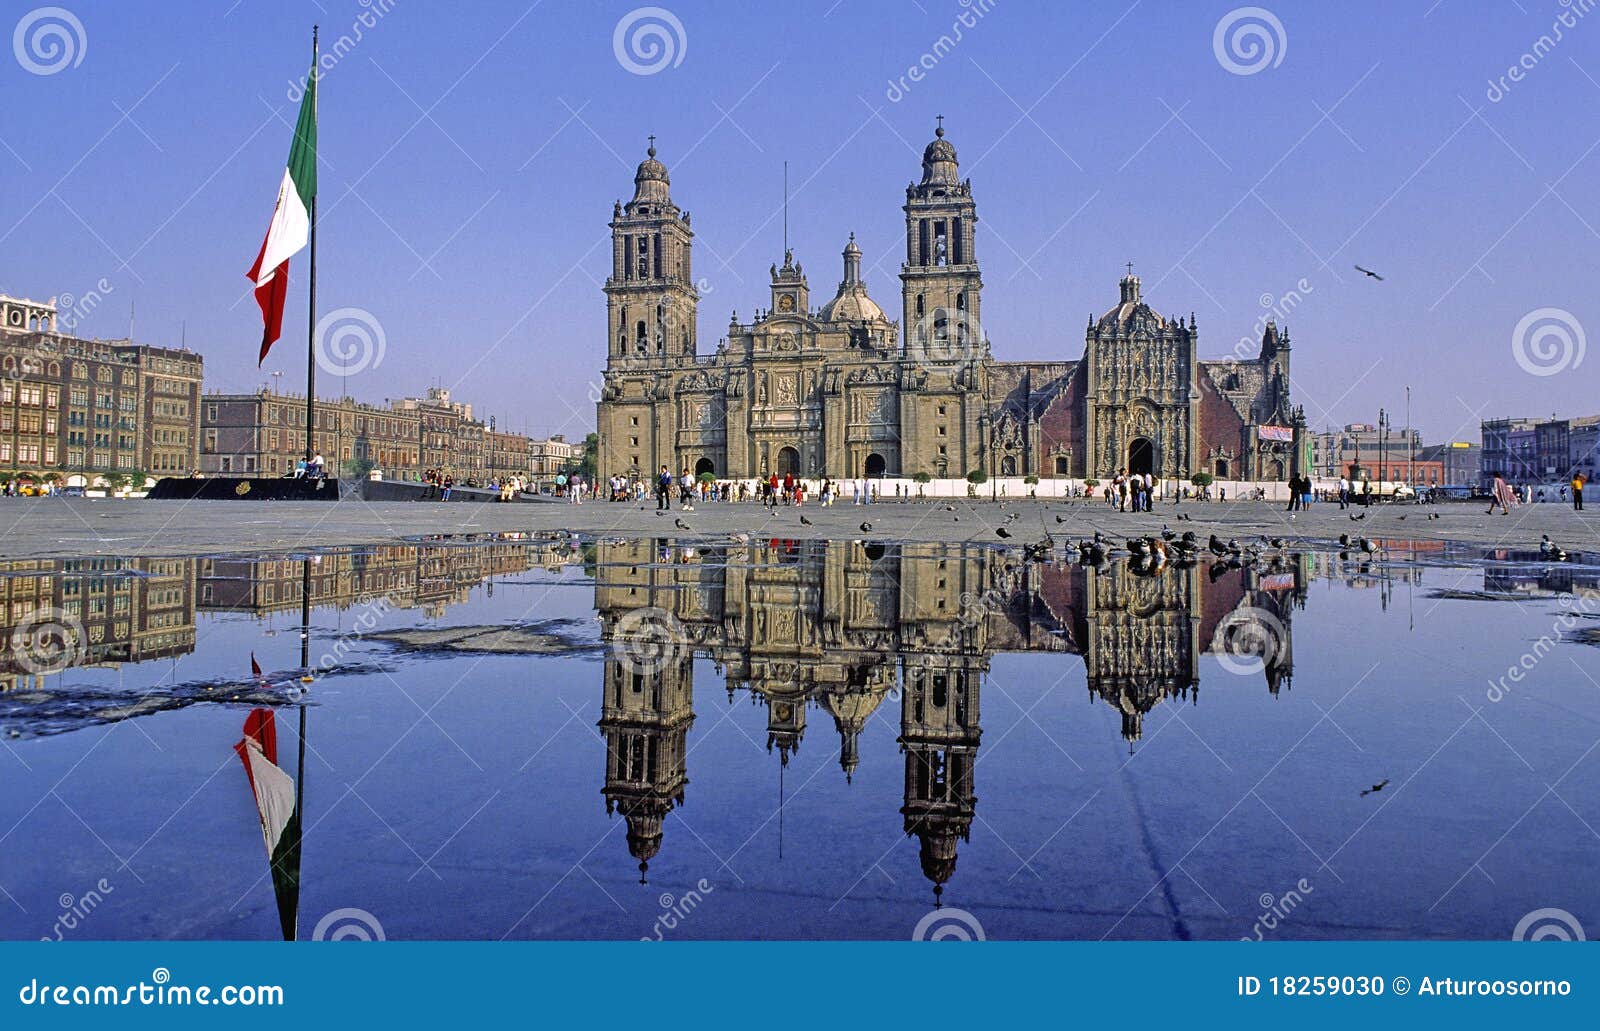 cathedral reflected